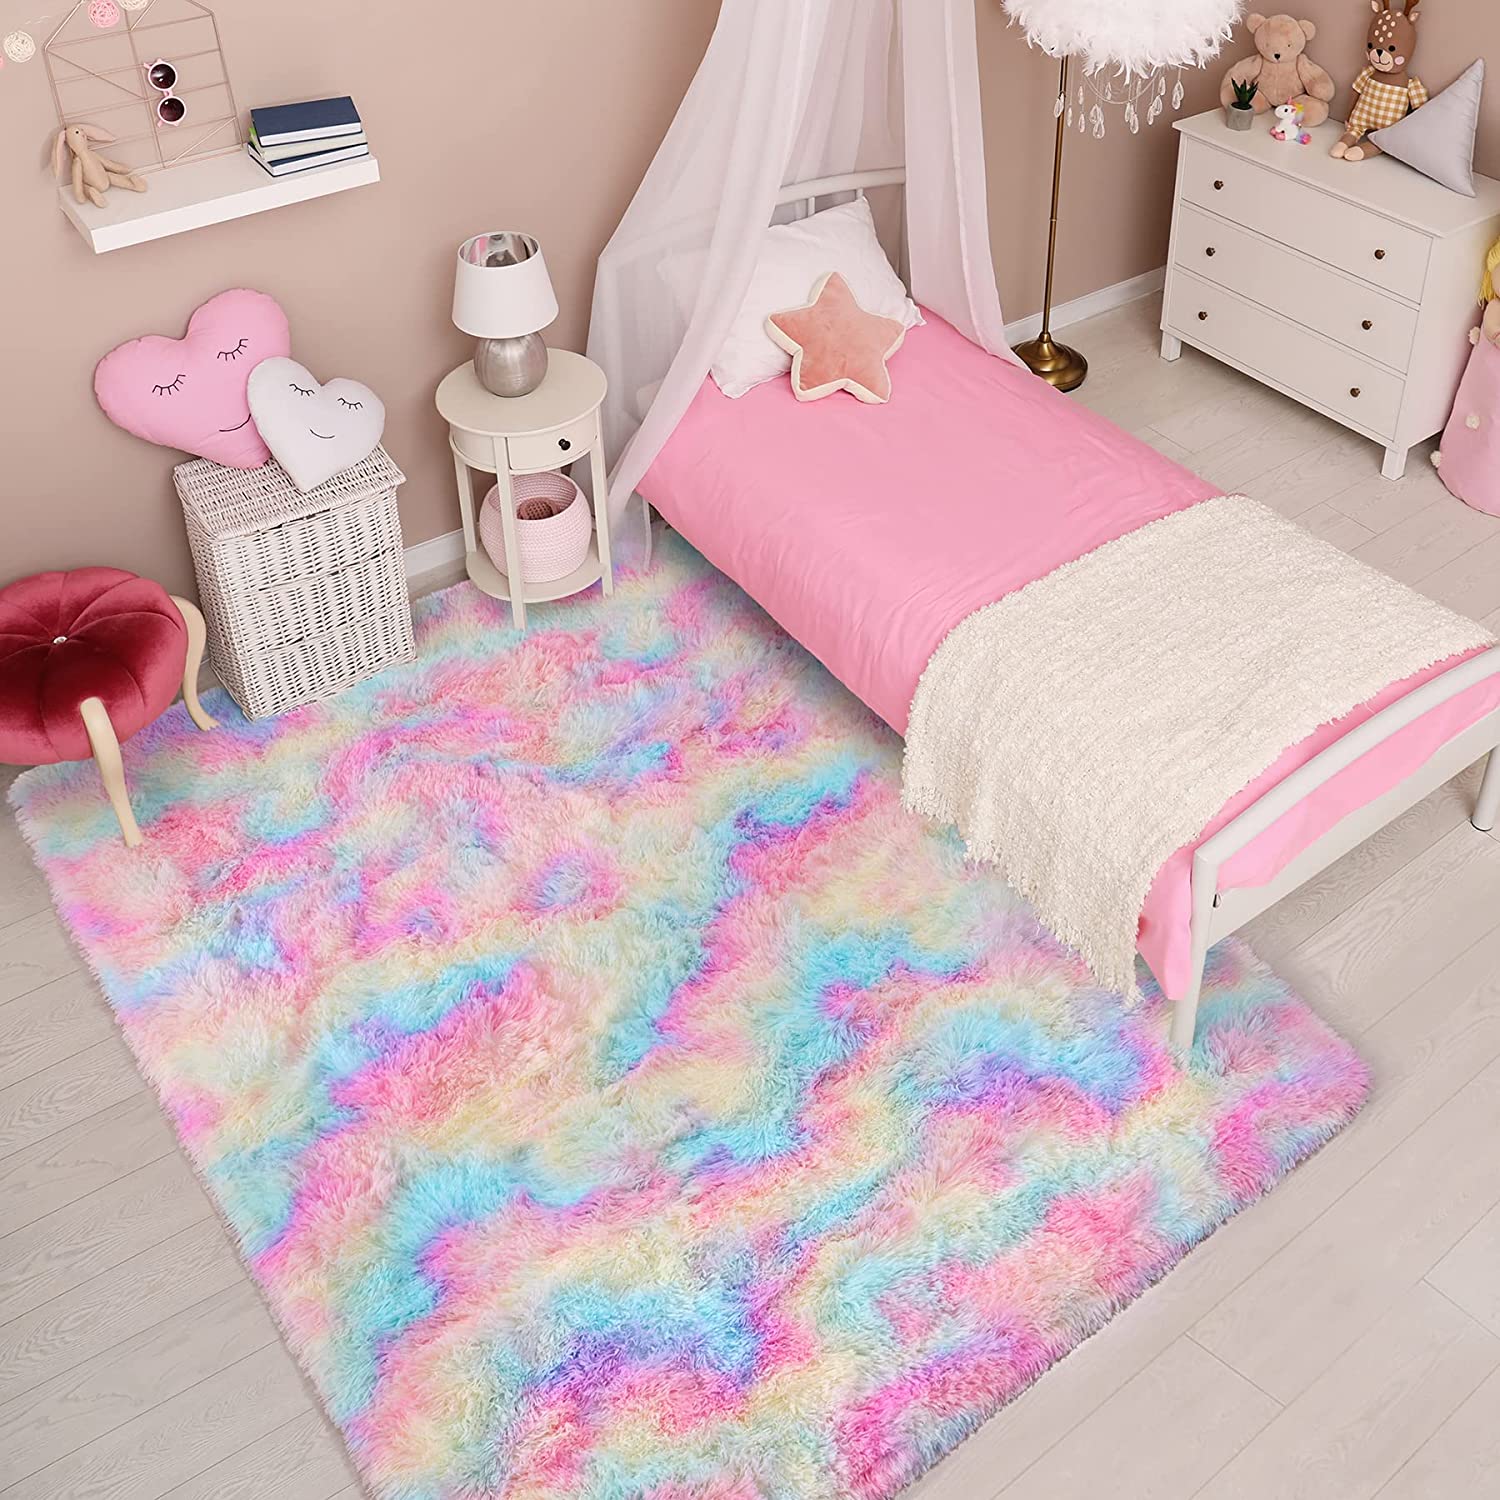 Noahas Super Soft Rainbow Rugs Area Rugs For Kids, Colorful Shaggy Carpet For Living Room Bedroom Nursery Room, 4'x6' - image 4 of 8